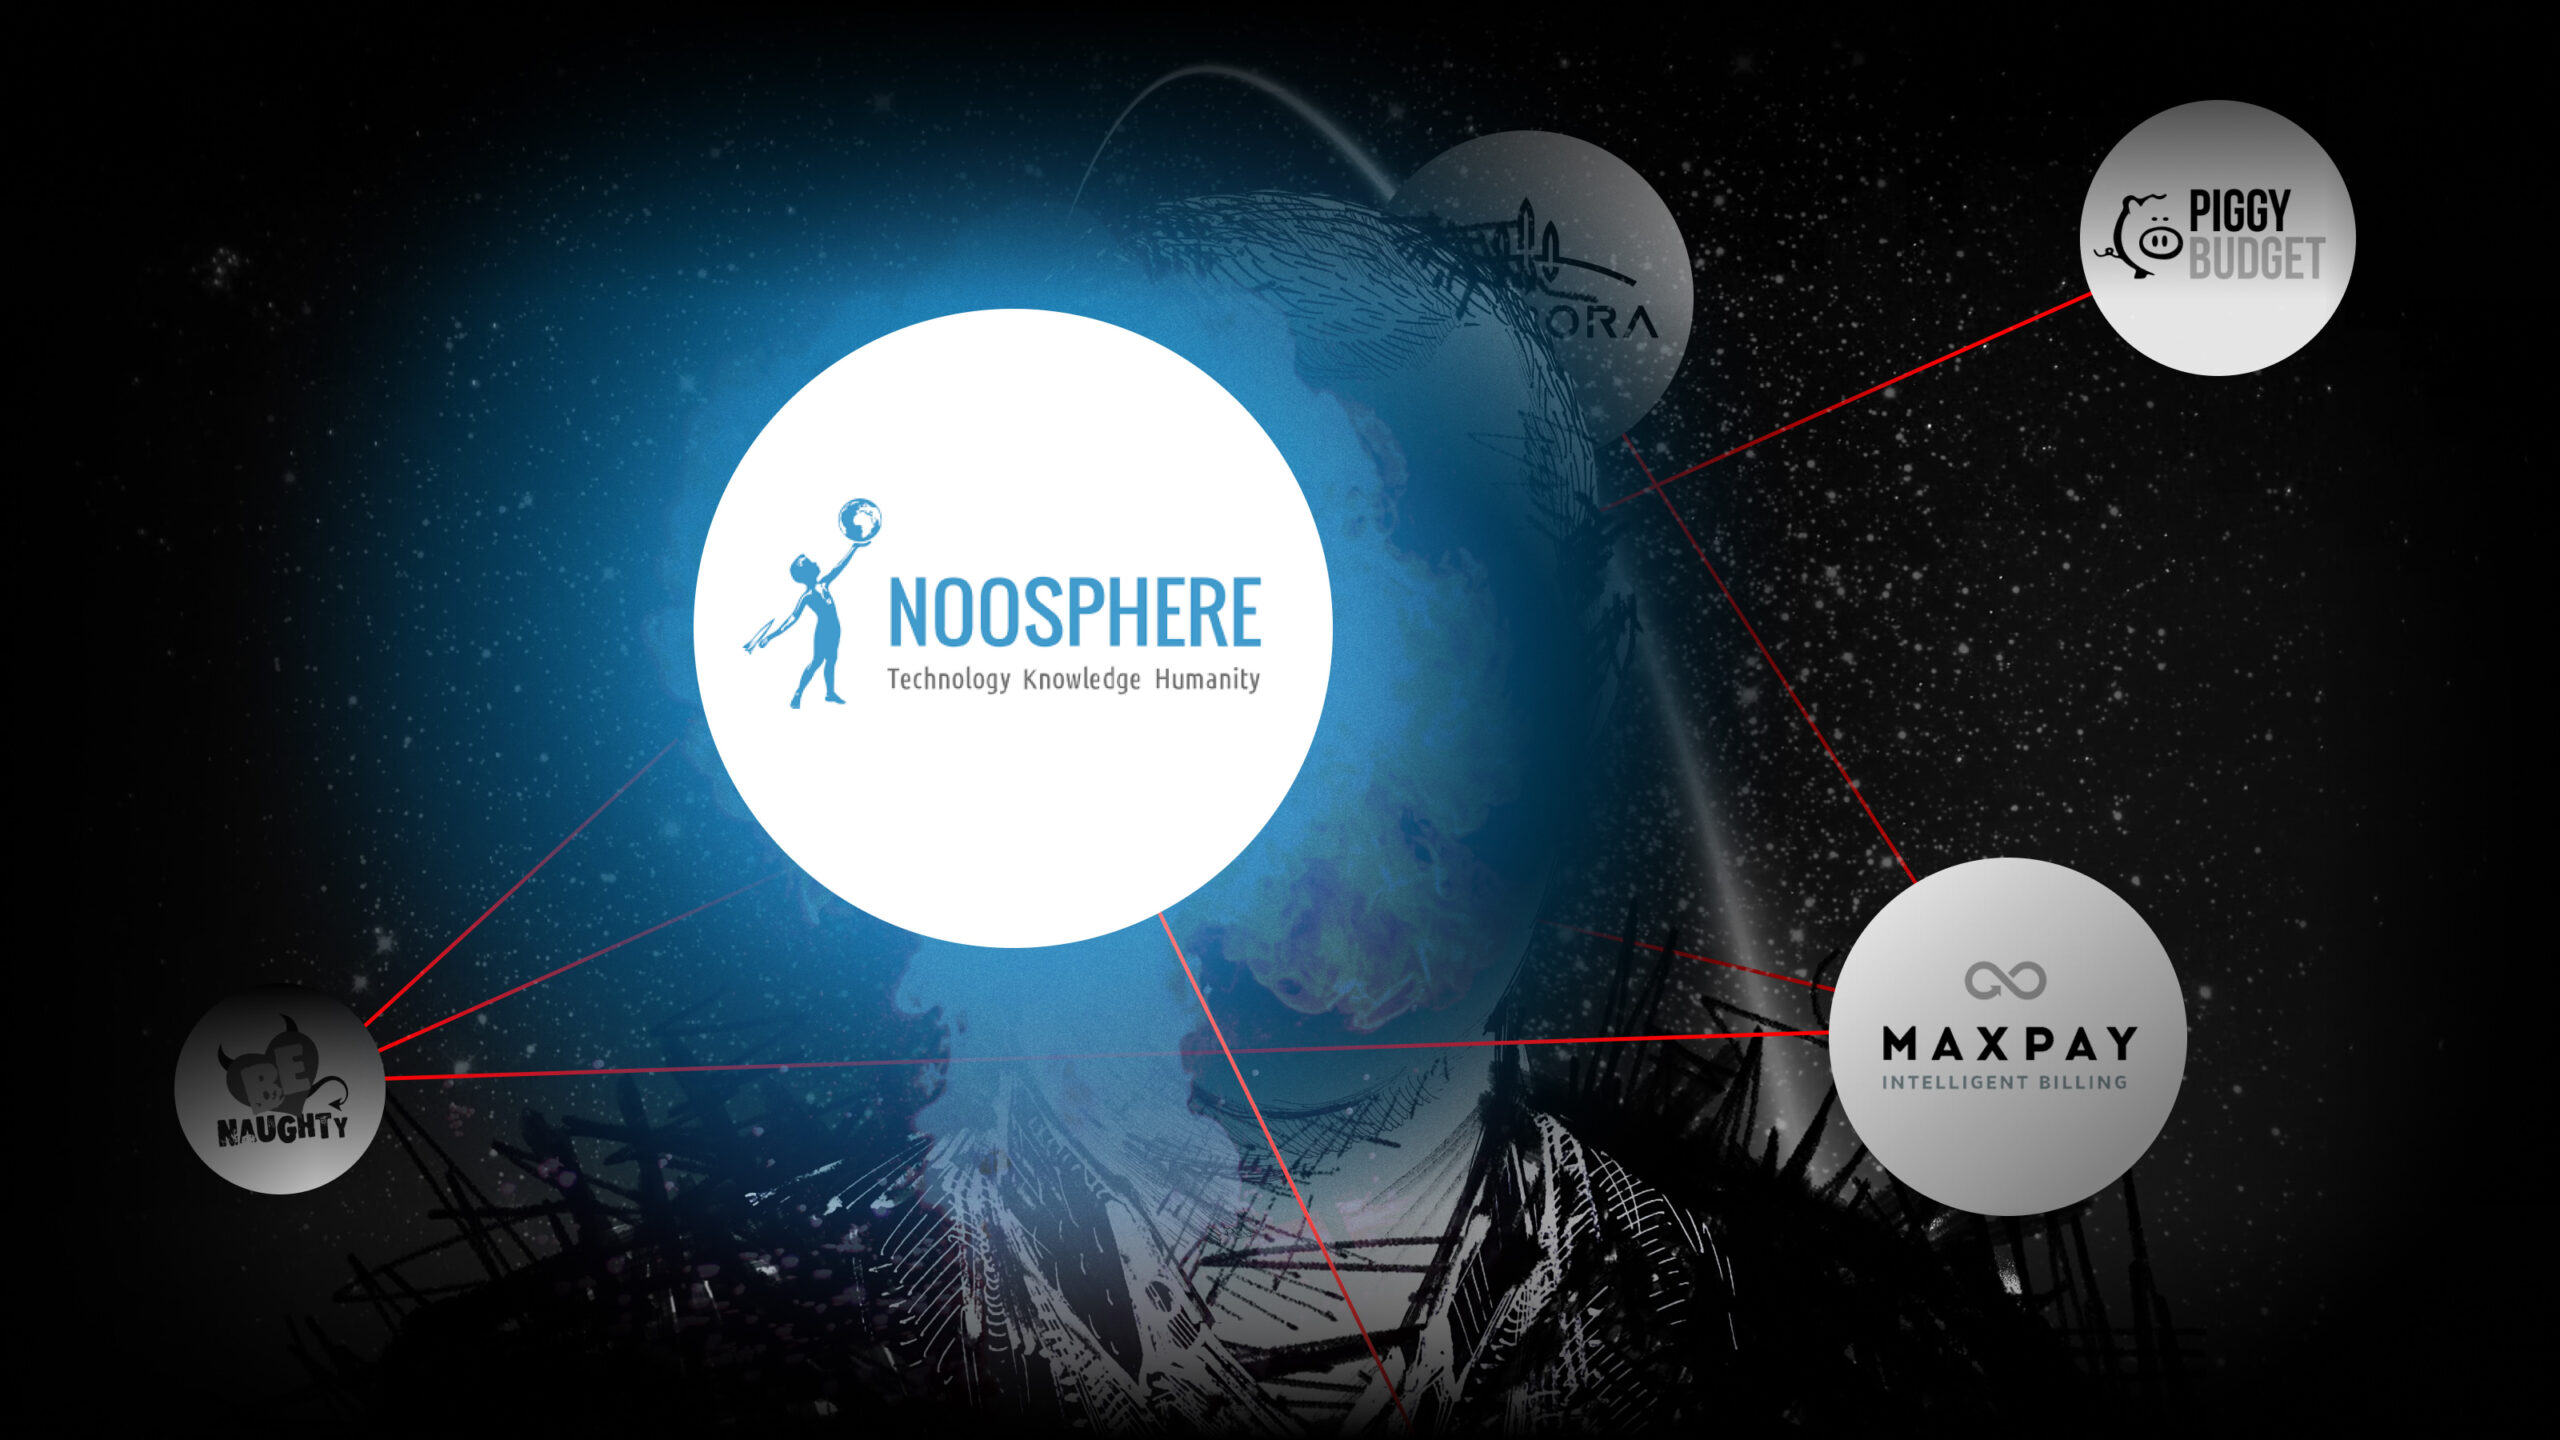 Illustration of a figure with face obscured by a glowing blue Noosphere logo. In the background are the logos of other companies discussed in this series connected by red lines.